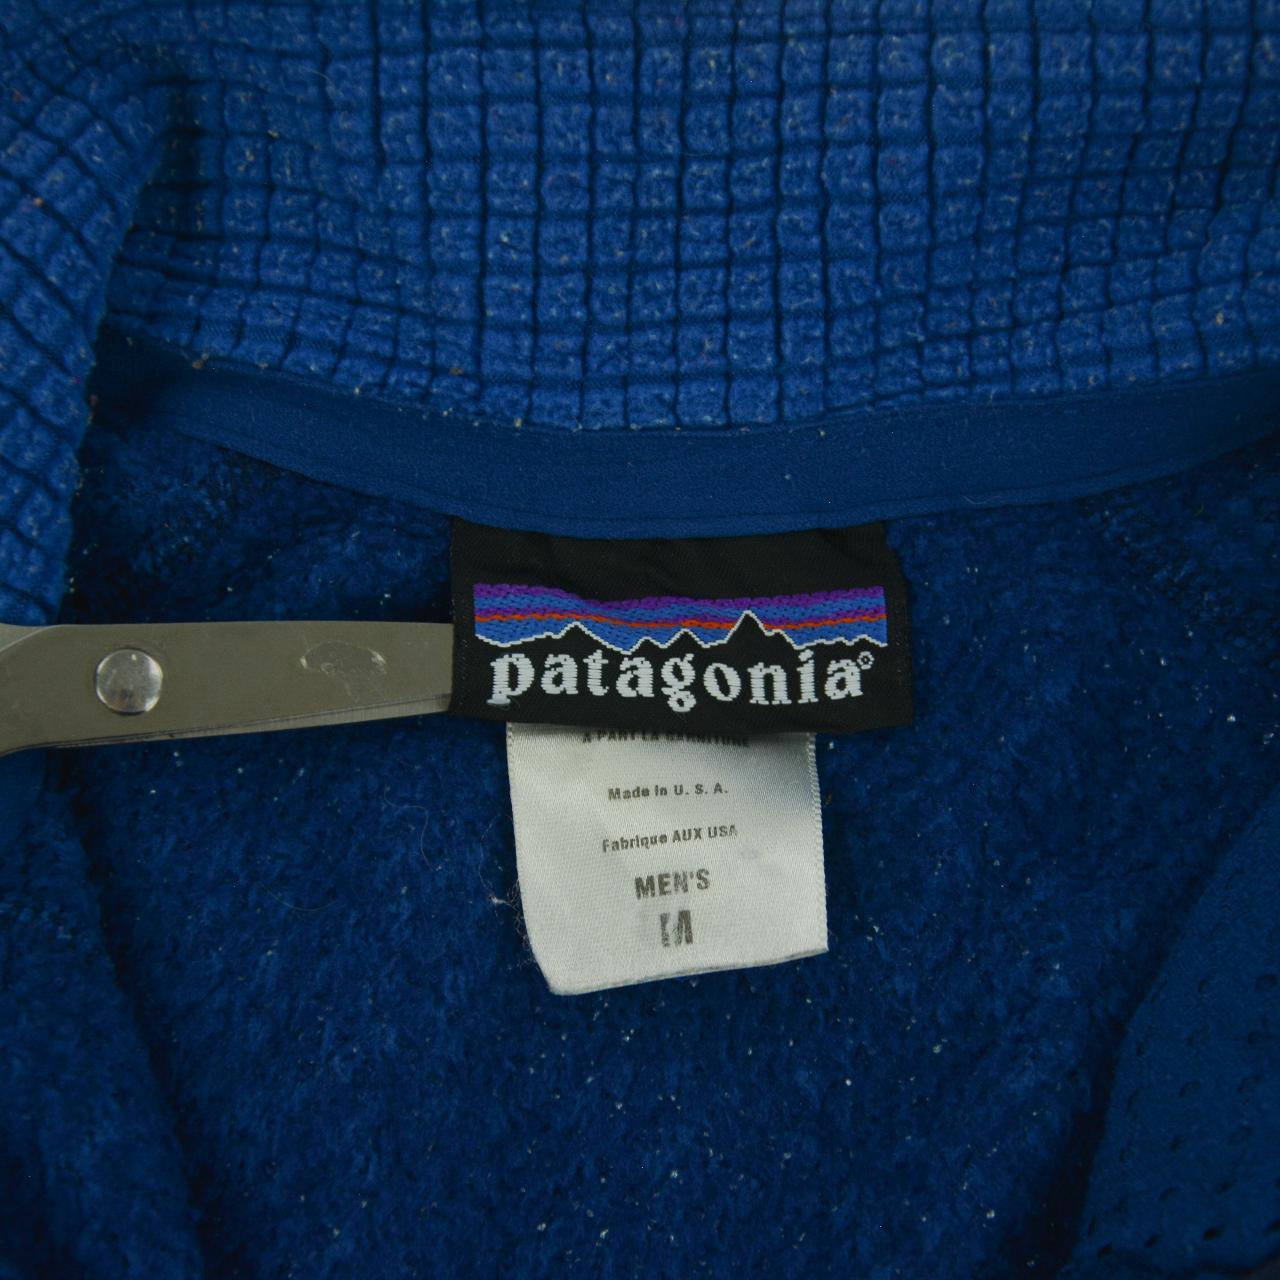 Vintage Patagonia Fleece Size S - Known Source